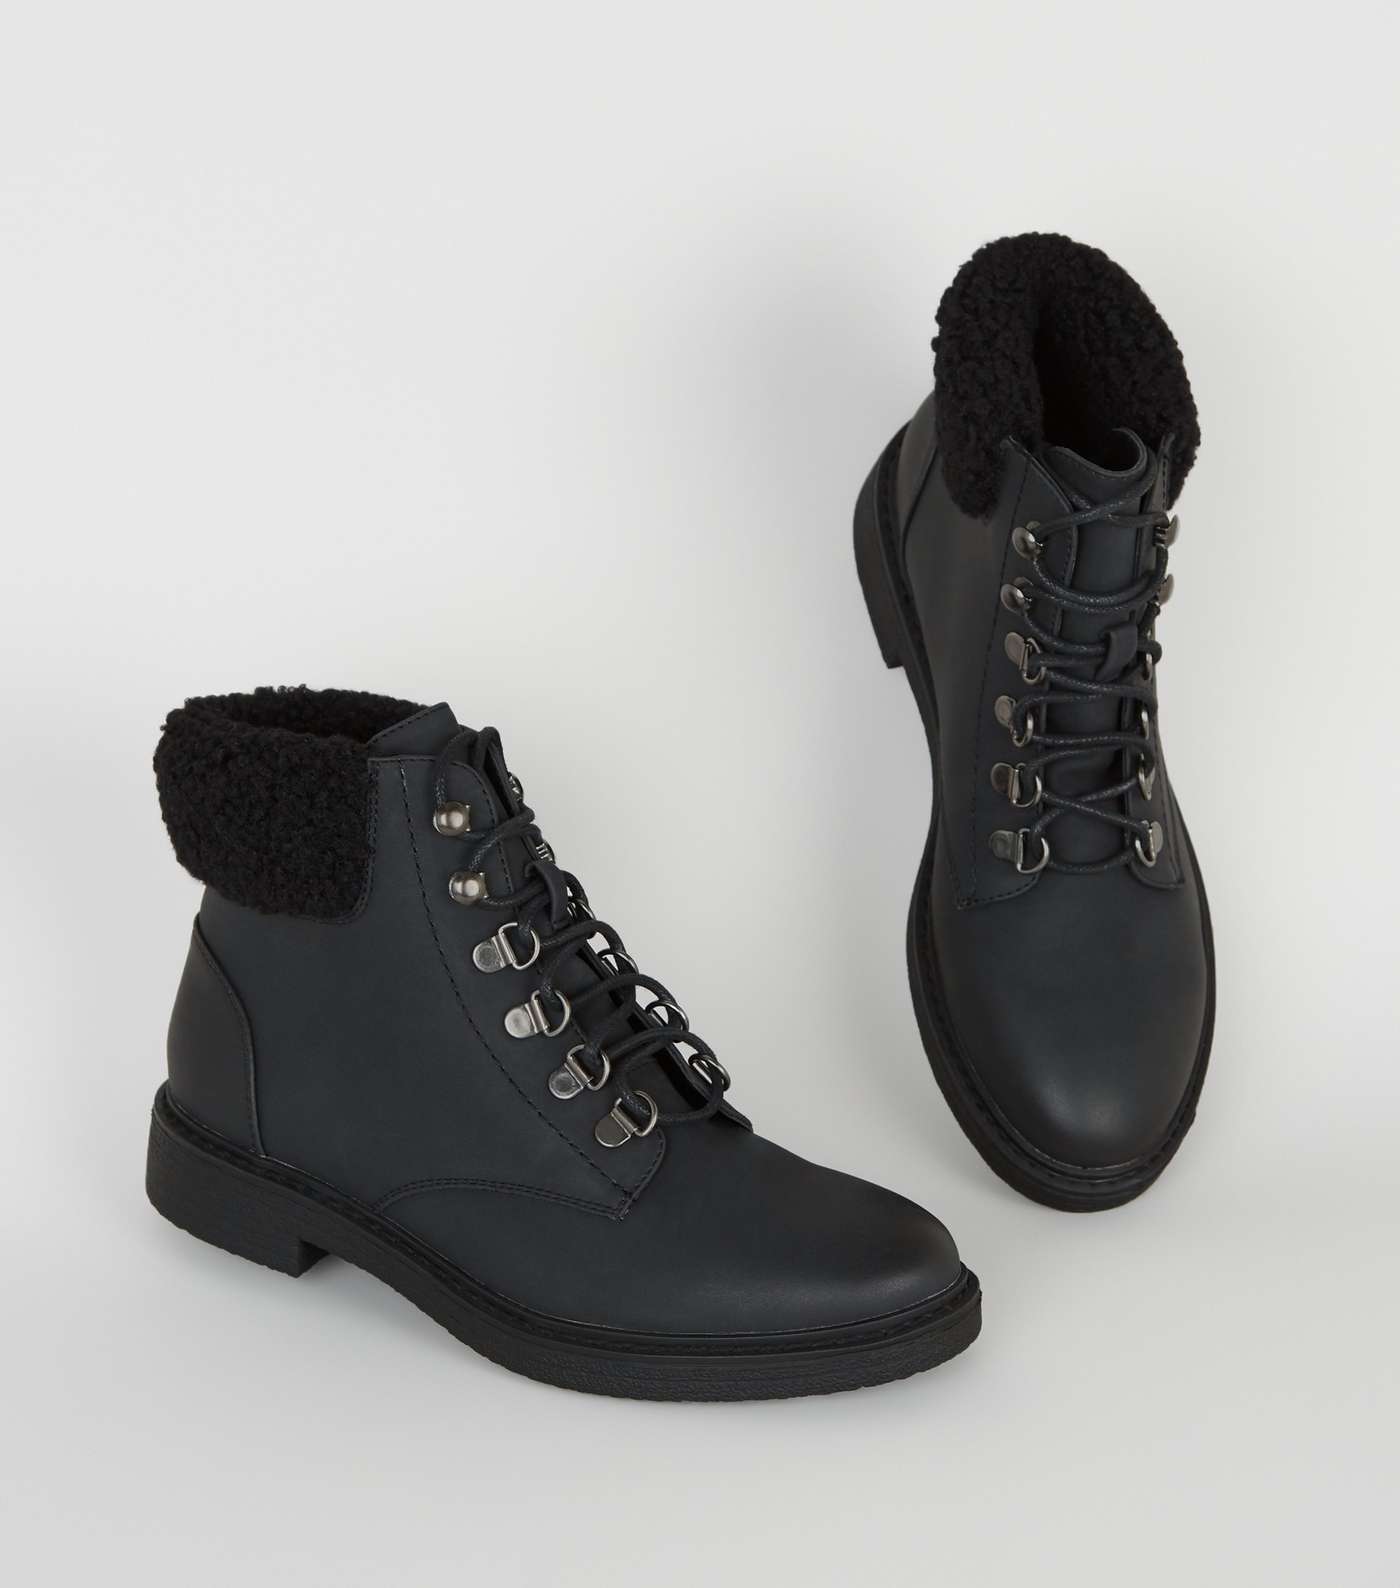 Girls Black Teddy Trim Lace Up Boots Image 3